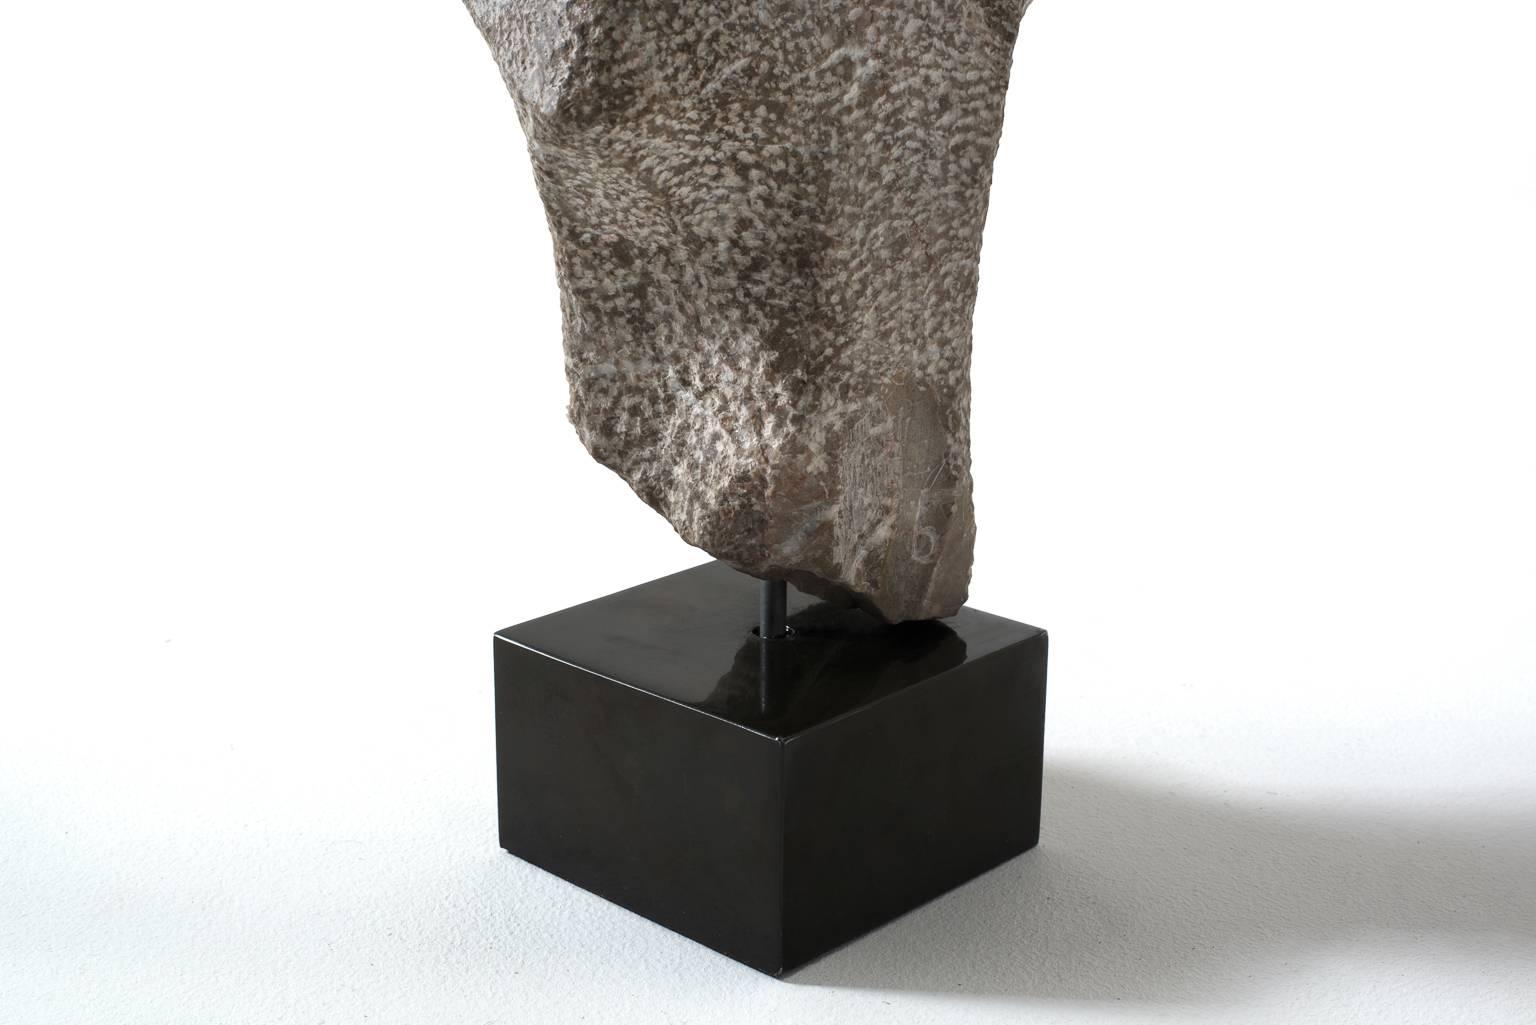 abstract stone sculptures